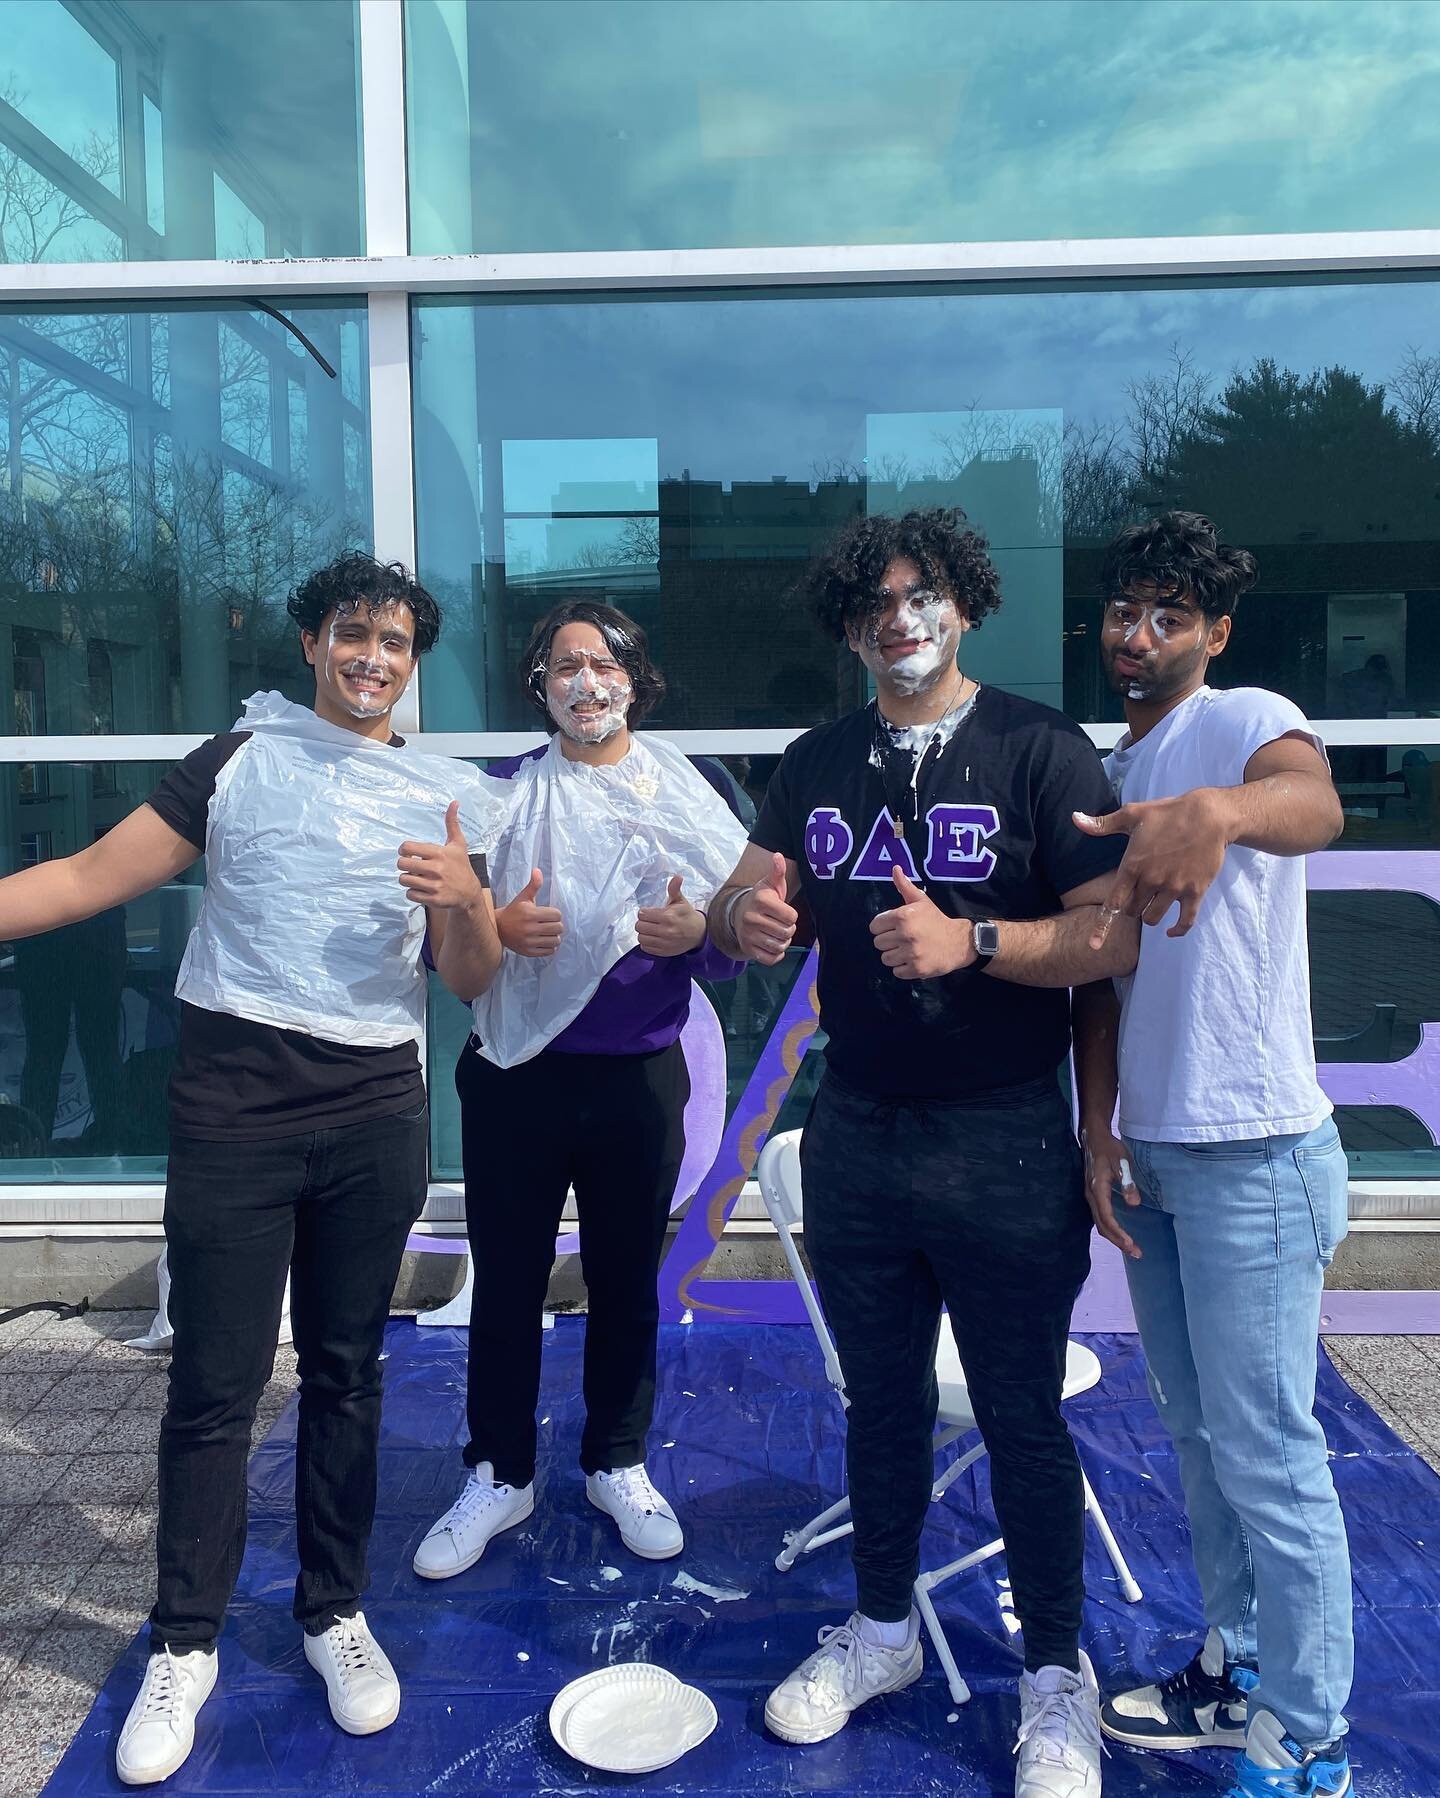 Thank you to everyone for coming out to Pie a Phi this past Friday! 💜

Quick recap of the best pies 🥧: 
Our S/RMO Natalie got pied by SBU&rsquo;s mascot Wolfie 🌊🐺❤️ (slide 2)
Our President Akaash got pied by the former president and other active 